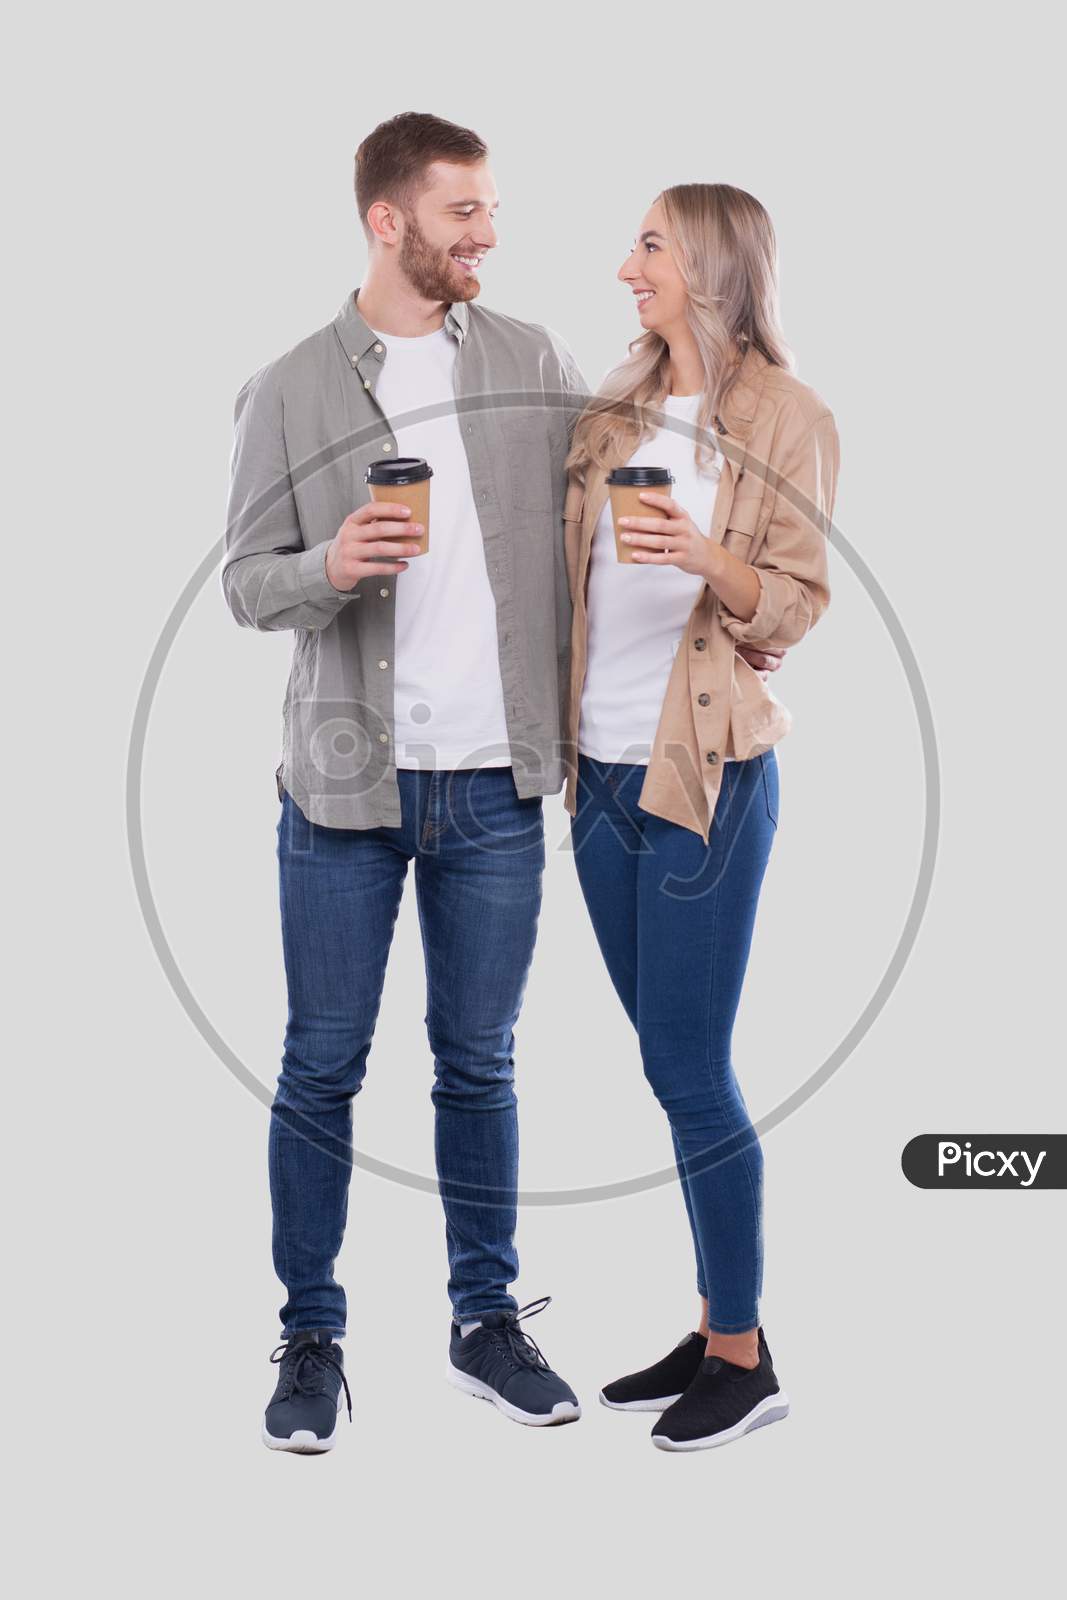 Couple Holding Coffee Cups Looking At Each Other Isolated. Couple Standing And Holding Coffee To Go Cup. Man And Woman Hugging, Lovers, Friends, Couple Concept.